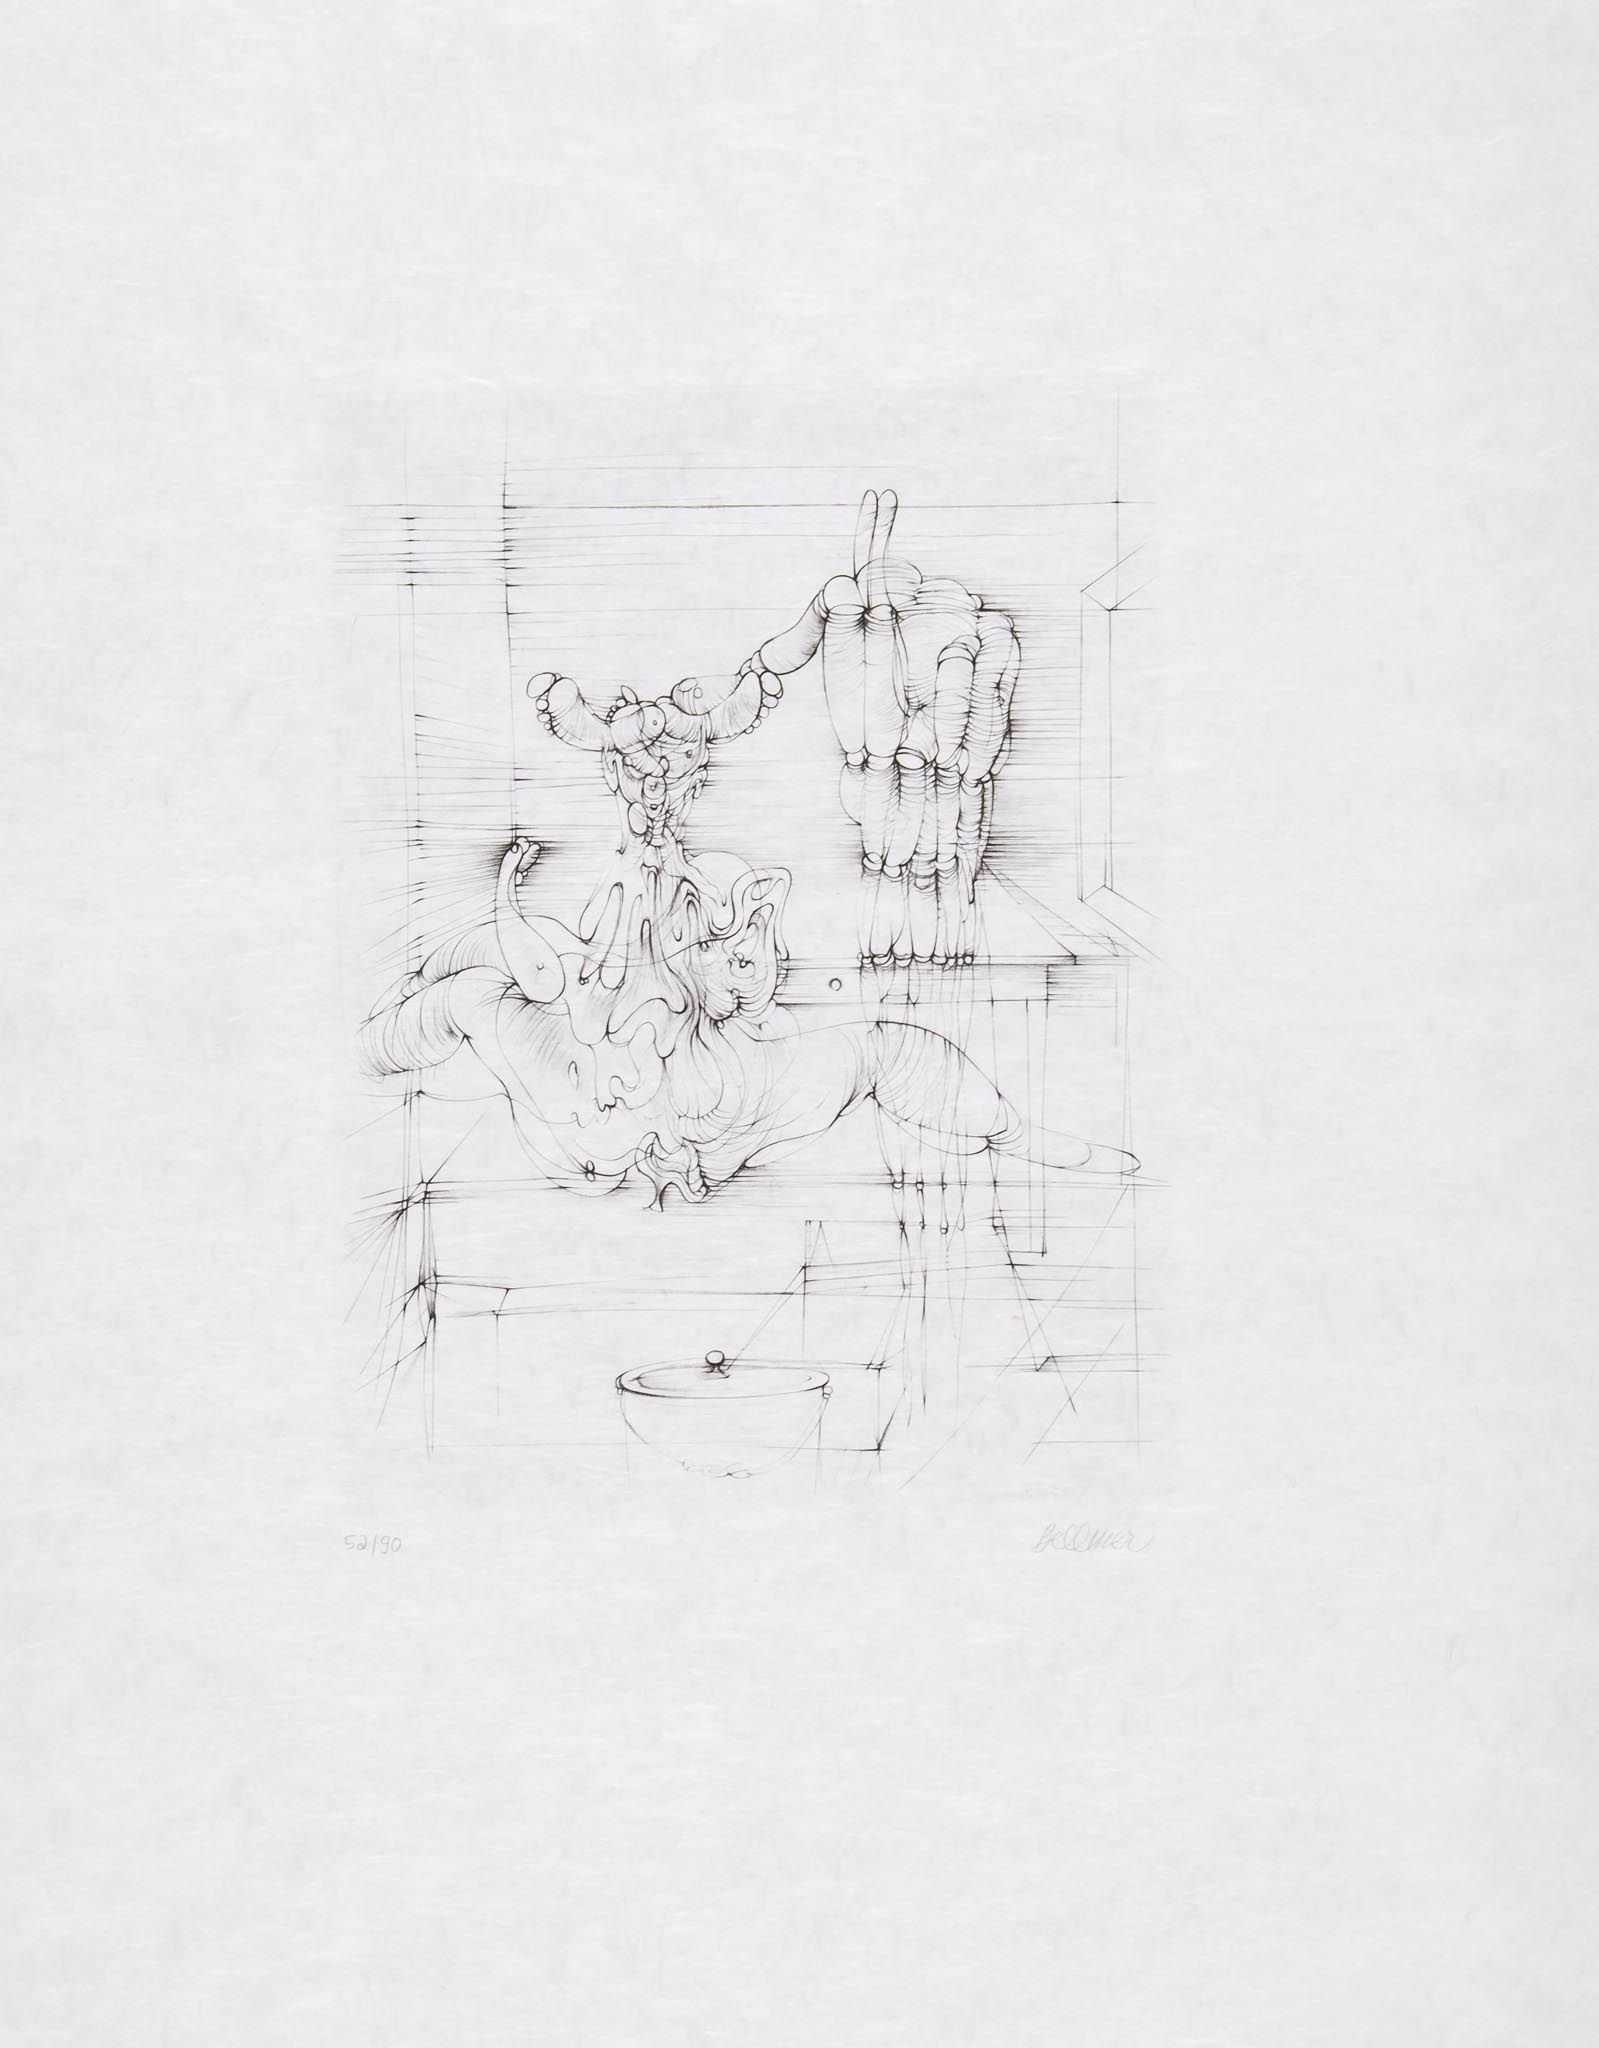 Hans Bellmer (1902-1975) - Hommage to Picasso Etching, 1973, signed in pencil, numbered 52/90, co-